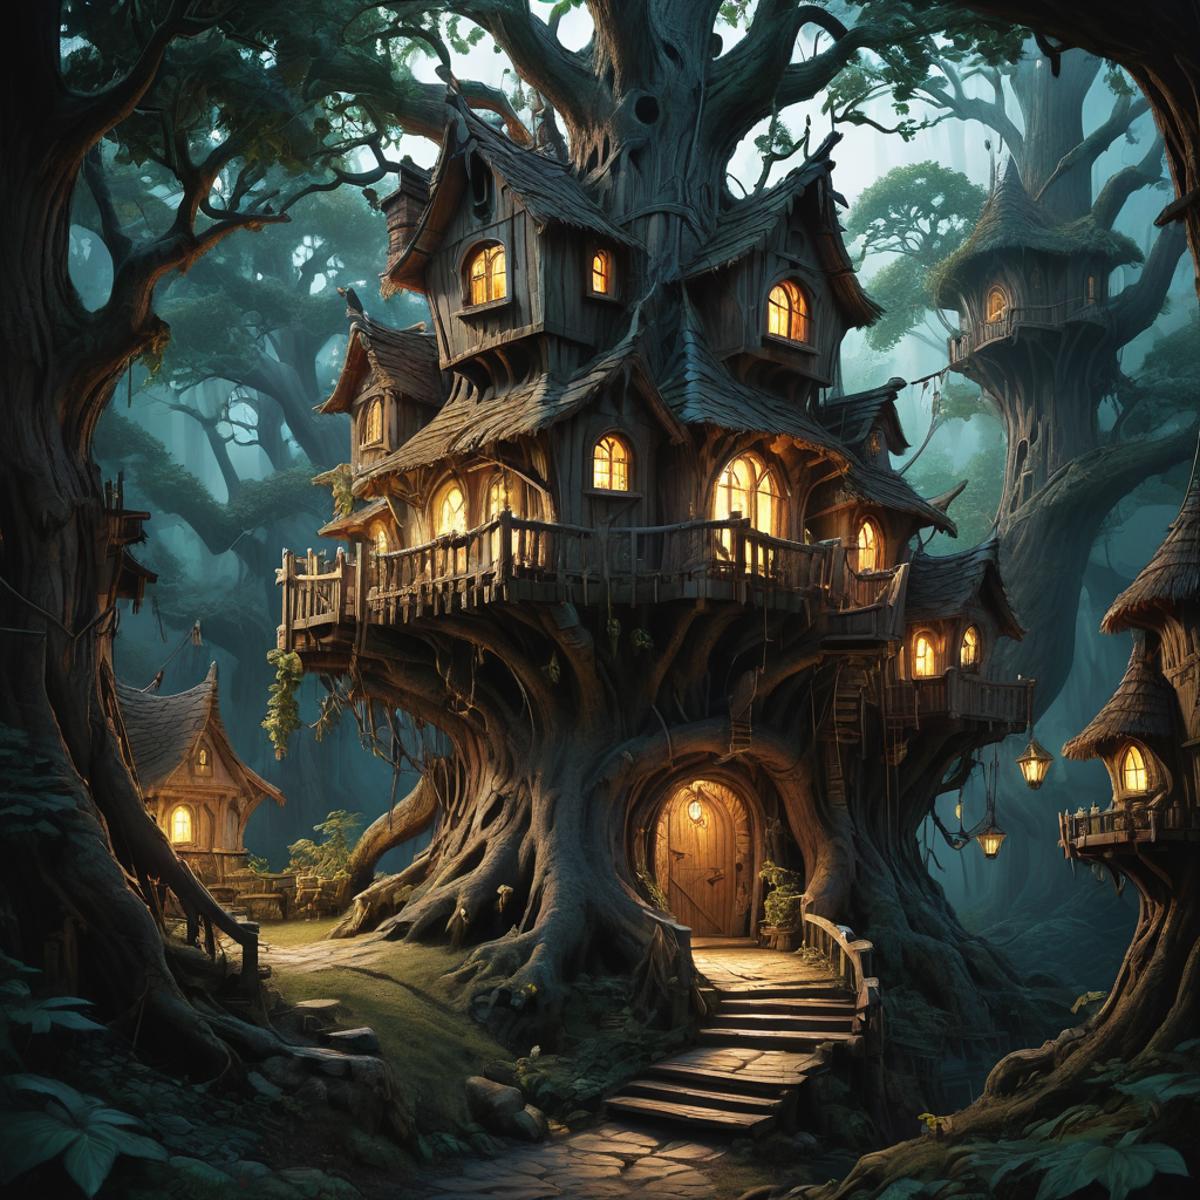 A magical, fairy tale-like house with a tree growing through it, surrounded by a forest at night. The house has a lit doorway and windows, creating a warm, inviting atmosphere.